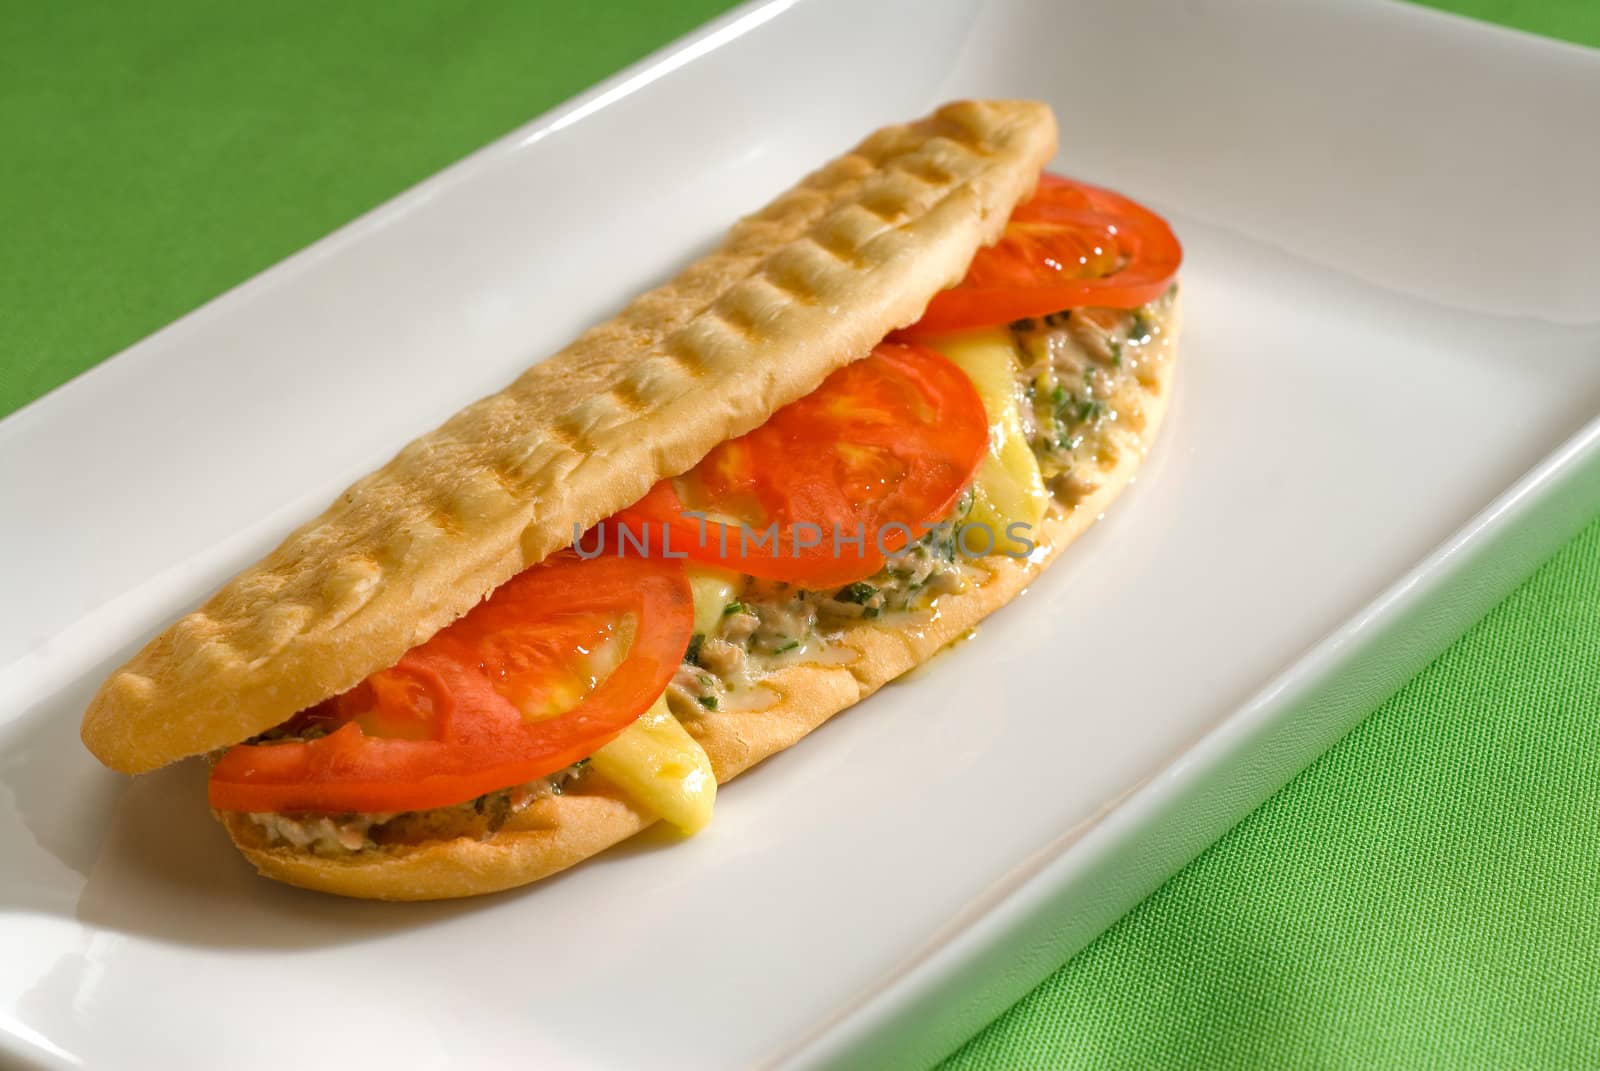 tuna tomato and cheese grilled panini sandwich close up on a plate